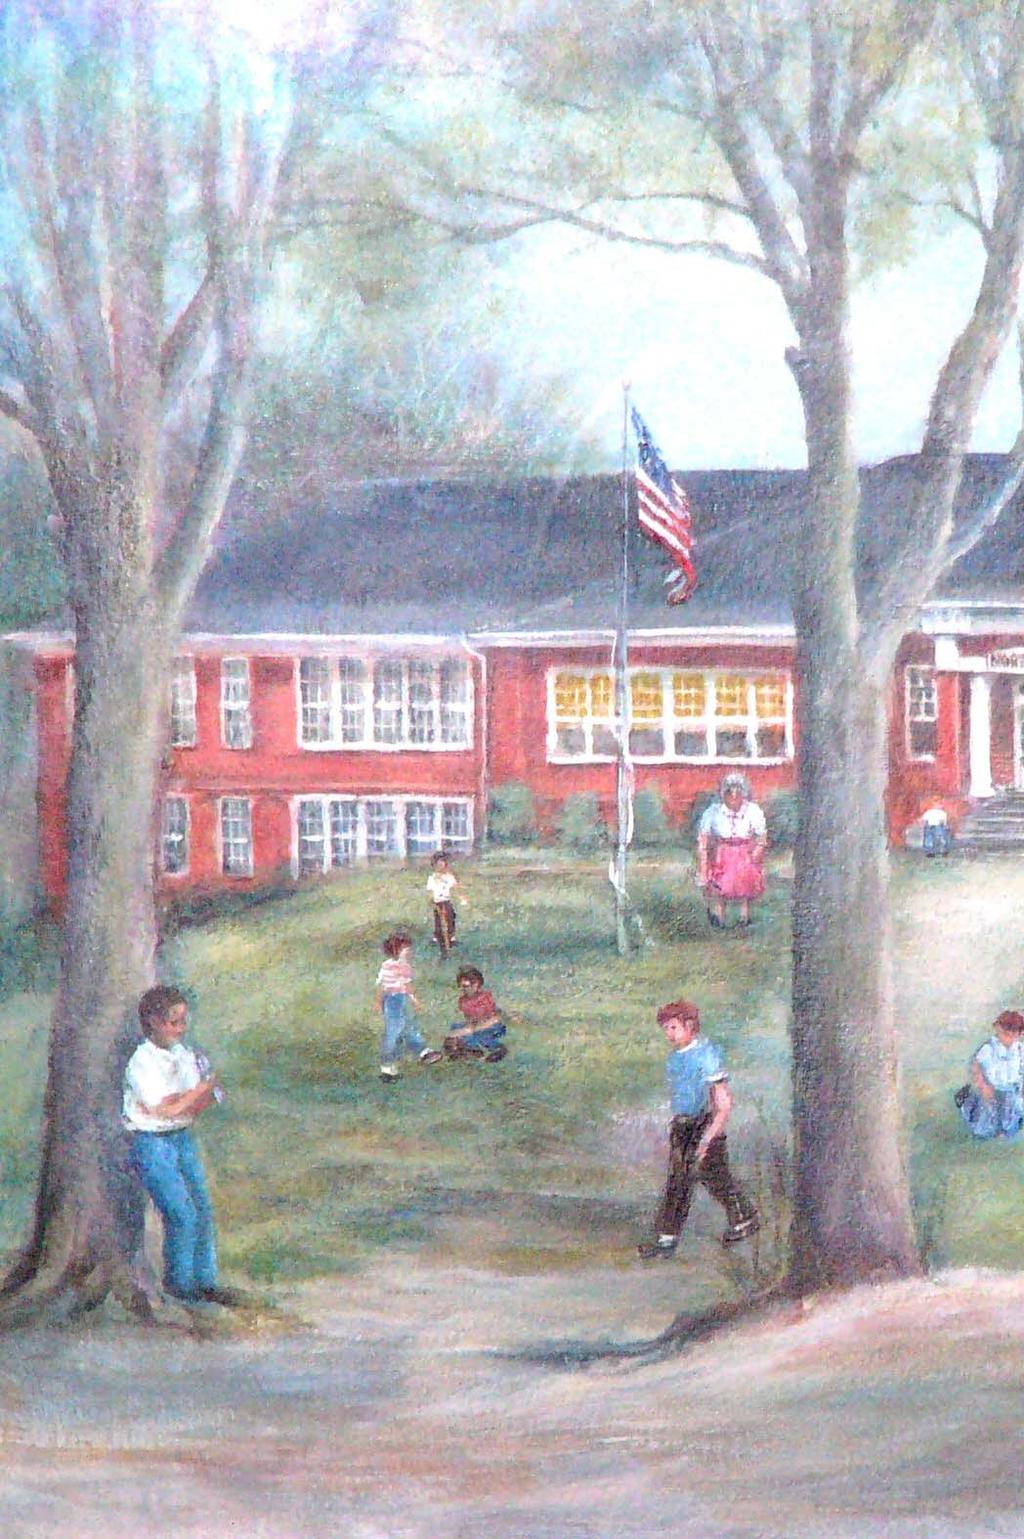 HISTORY OF BUILDING North Side Elementary is located at 502 North Hill Street in Griffin, Georgia.